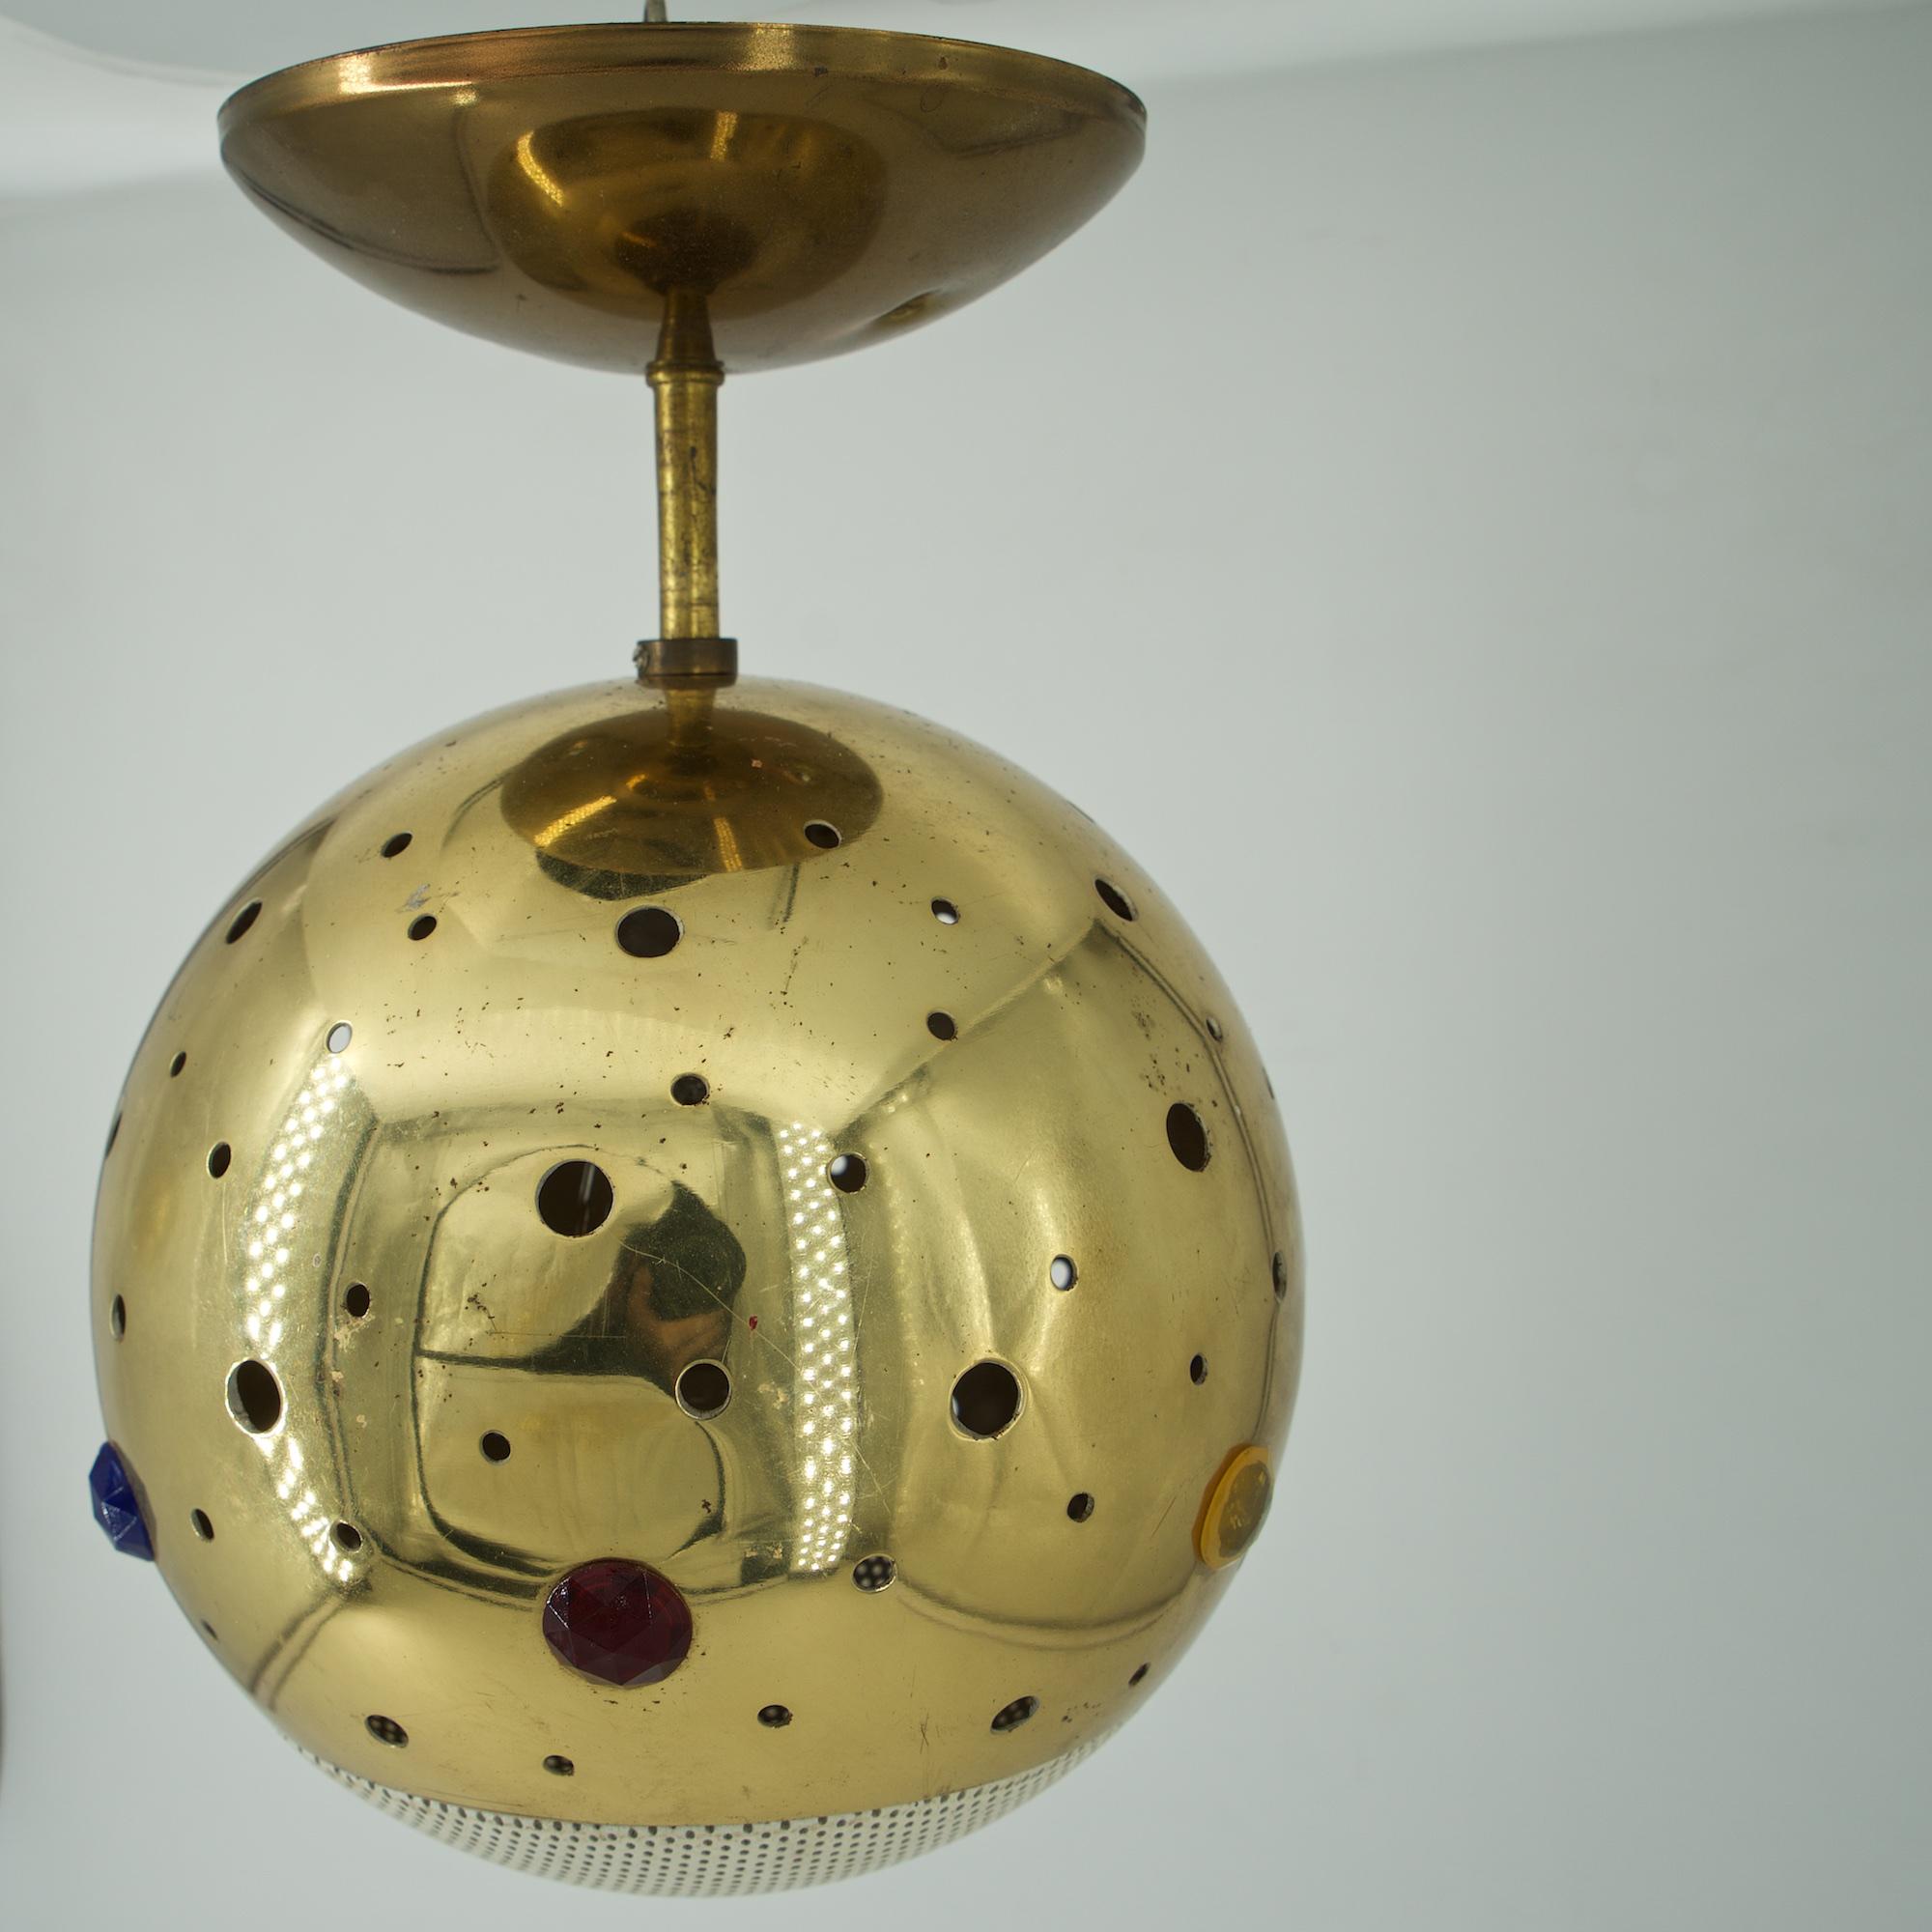 One wonderful small globe pendant night ceiling pendant mood light. Can also be just hung by wire as a pendant light. Porcelain socket inside, all metal and brass construction, except the gems are plastic, the gold gem replaced one of the originals